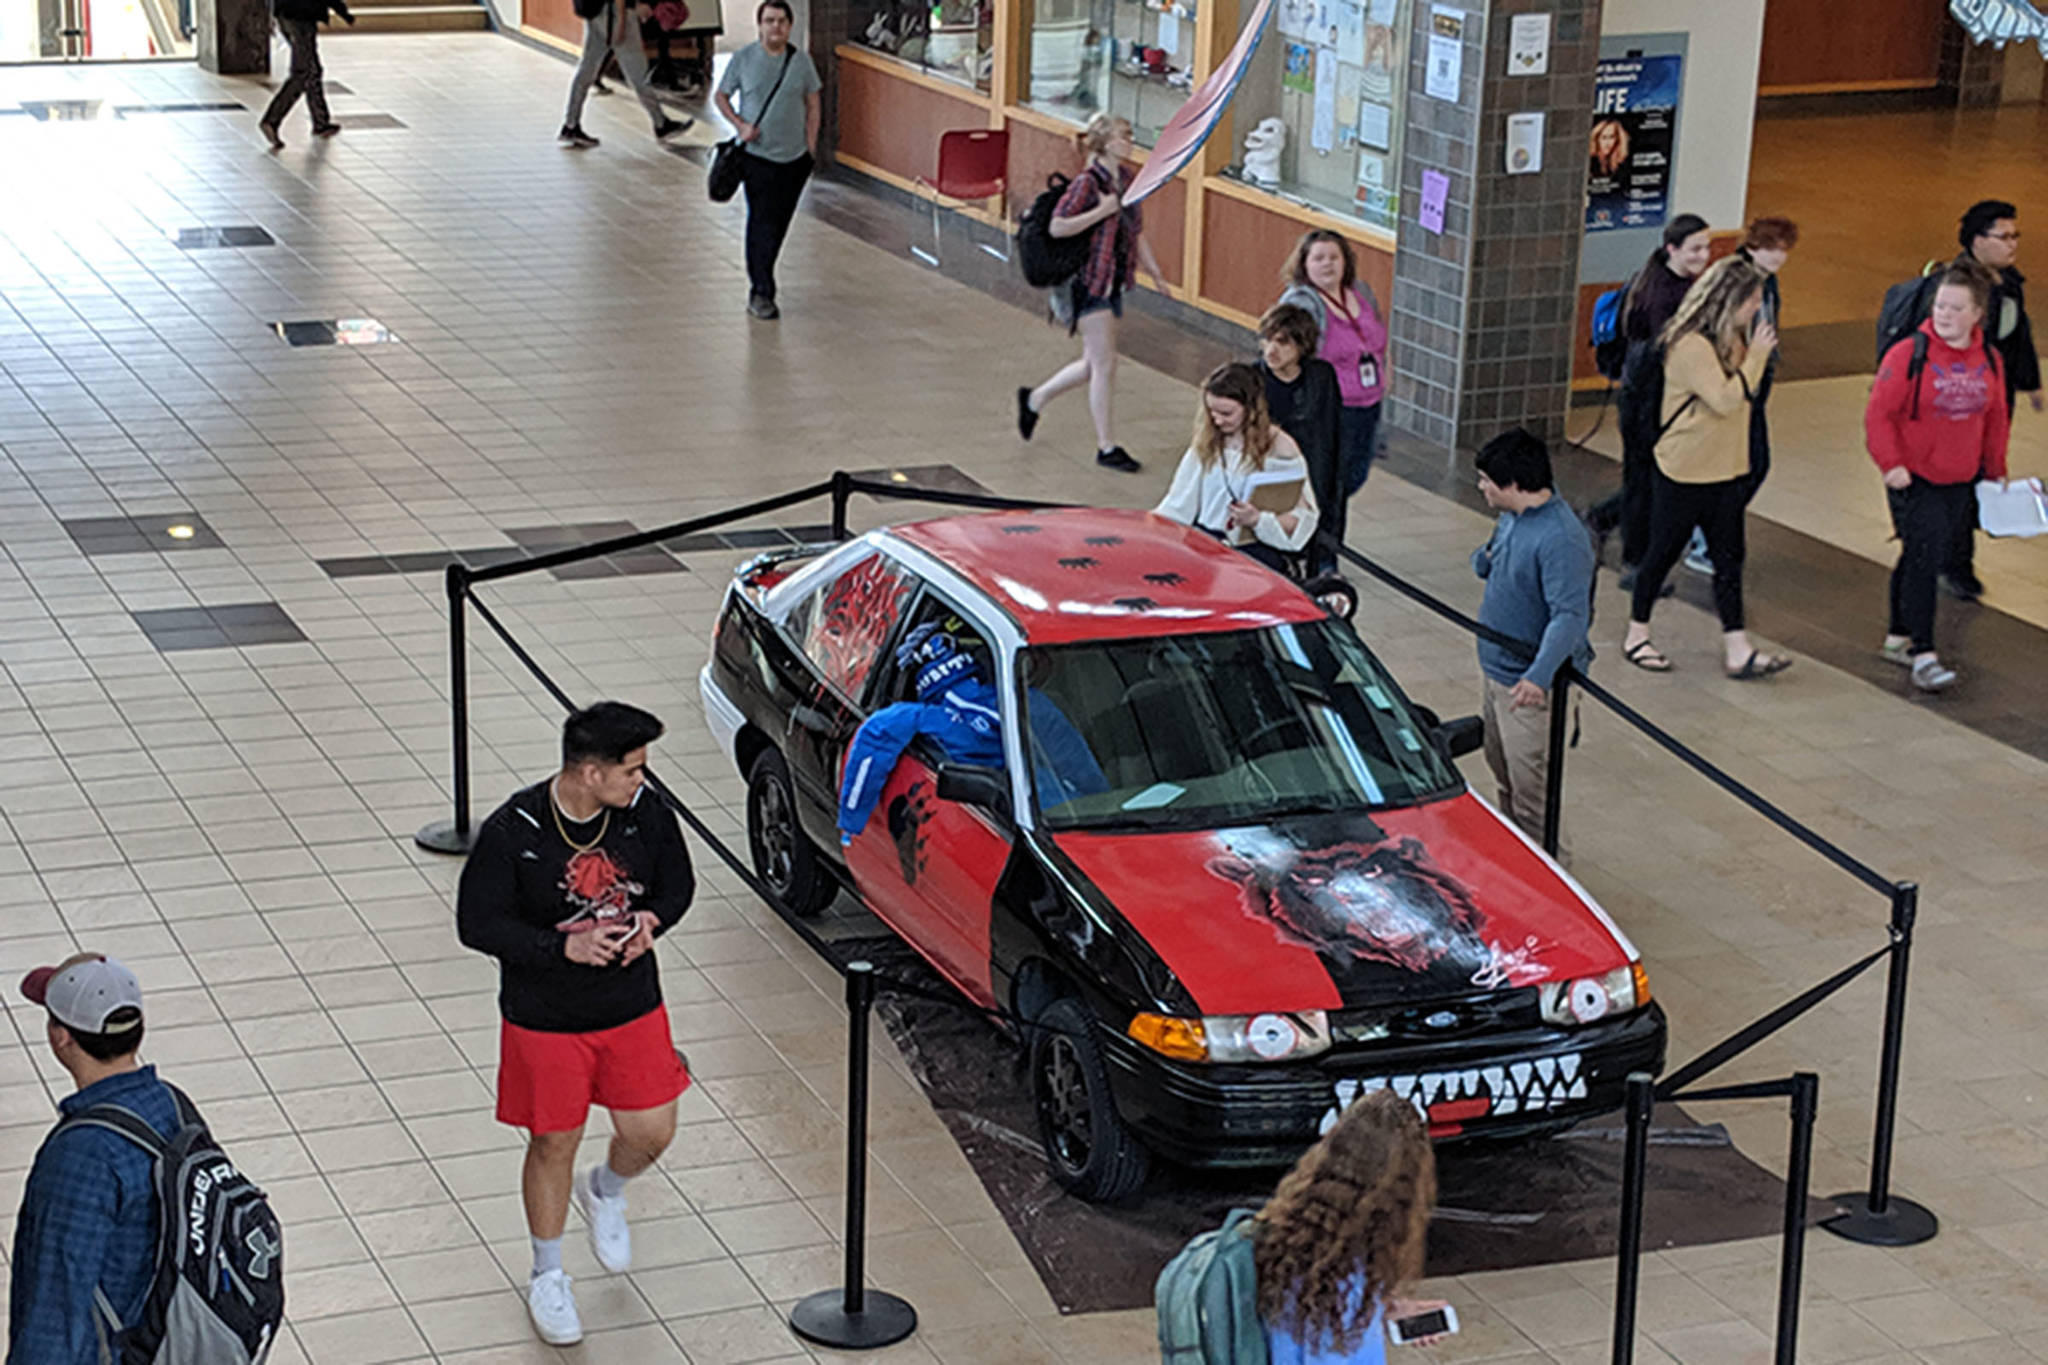 Students look at a car located in the Juneau-Douglas High School: Yadaa.at Kalé commons, May 13, 2019. While the car is an apparent senior prank, it did not cause damage to any property or prove to be a nuisance, administrators said. (Ben Hohenstatt | Juneau Empire)